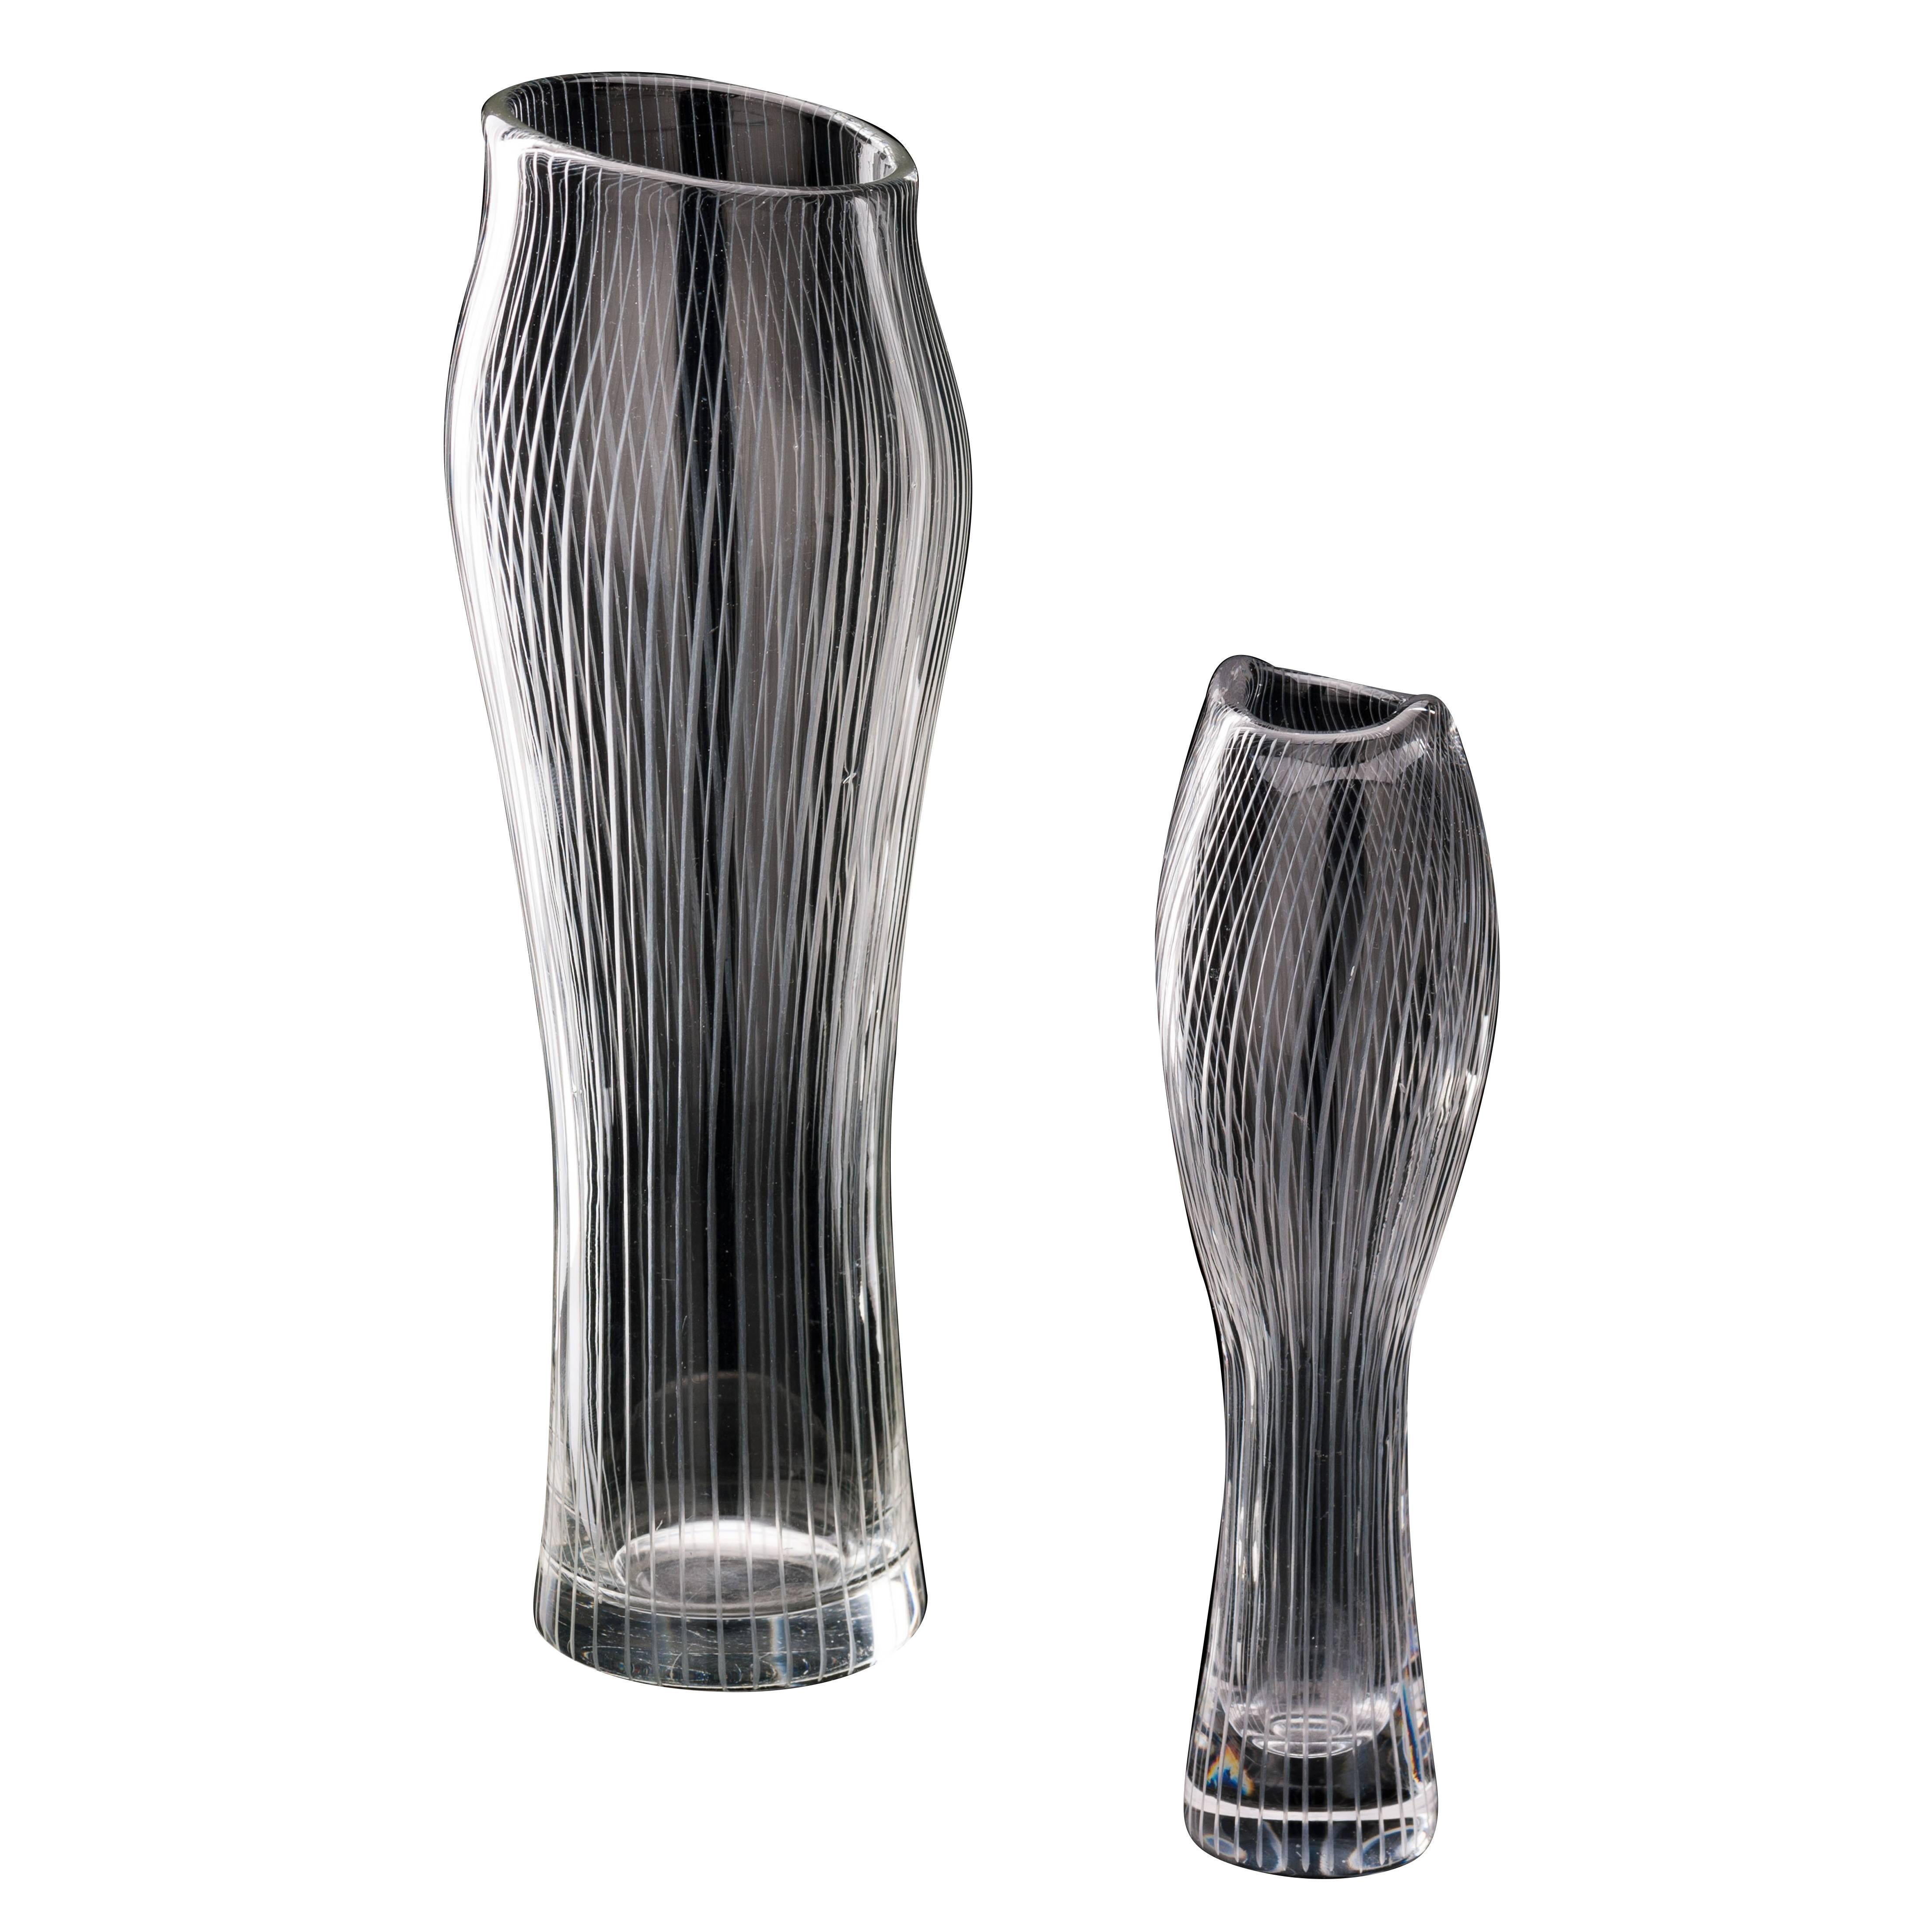 Pair of 1950s Line Etched Vases Art Glass by Tapio Wirkkala, Iittala Oy Finland